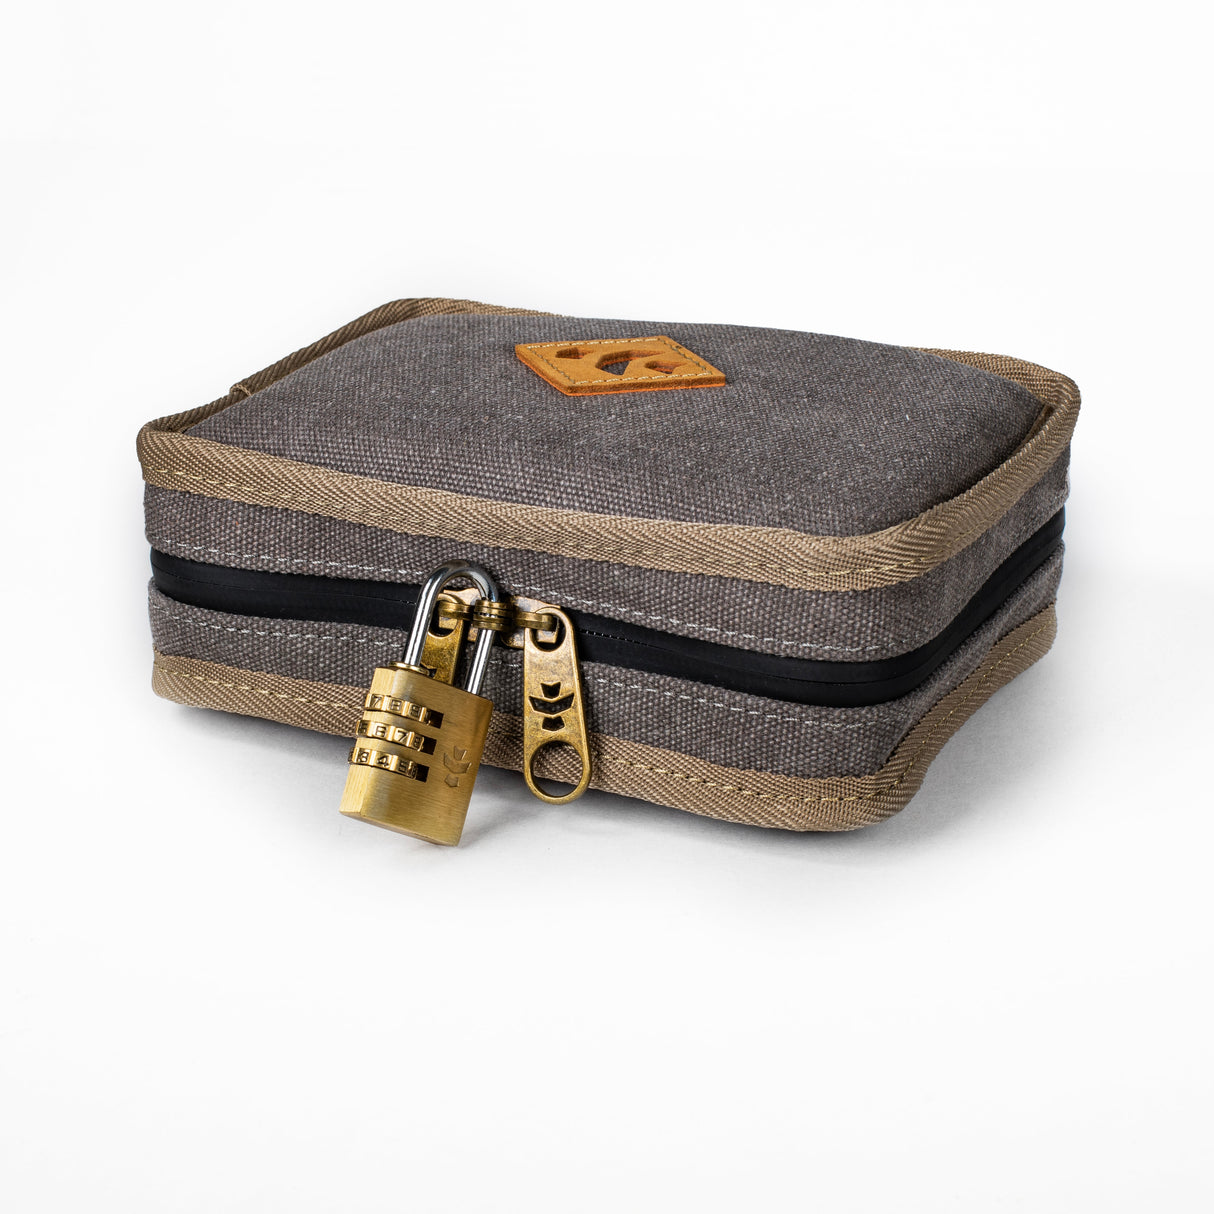 Revelry Supply The Pipe Kit - Smell Proof Case with Combination Lock - Front View